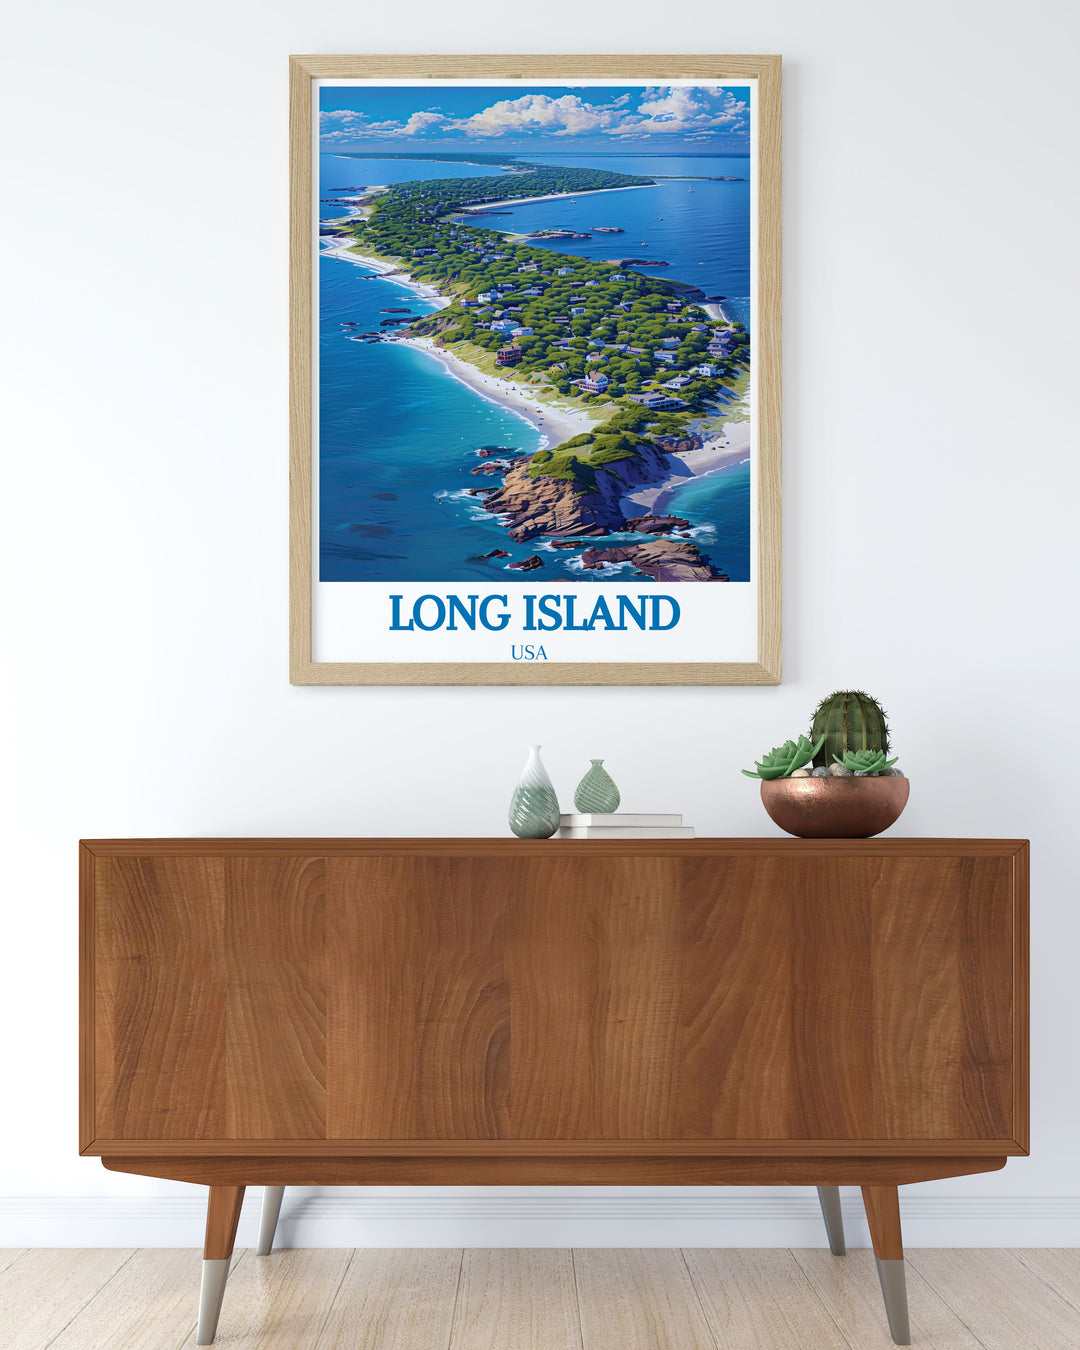 Experience the tranquility of Fire Island with this detailed poster, capturing its untouched dunes and peaceful atmosphere, perfect for adding a touch of coastal serenity to your home.